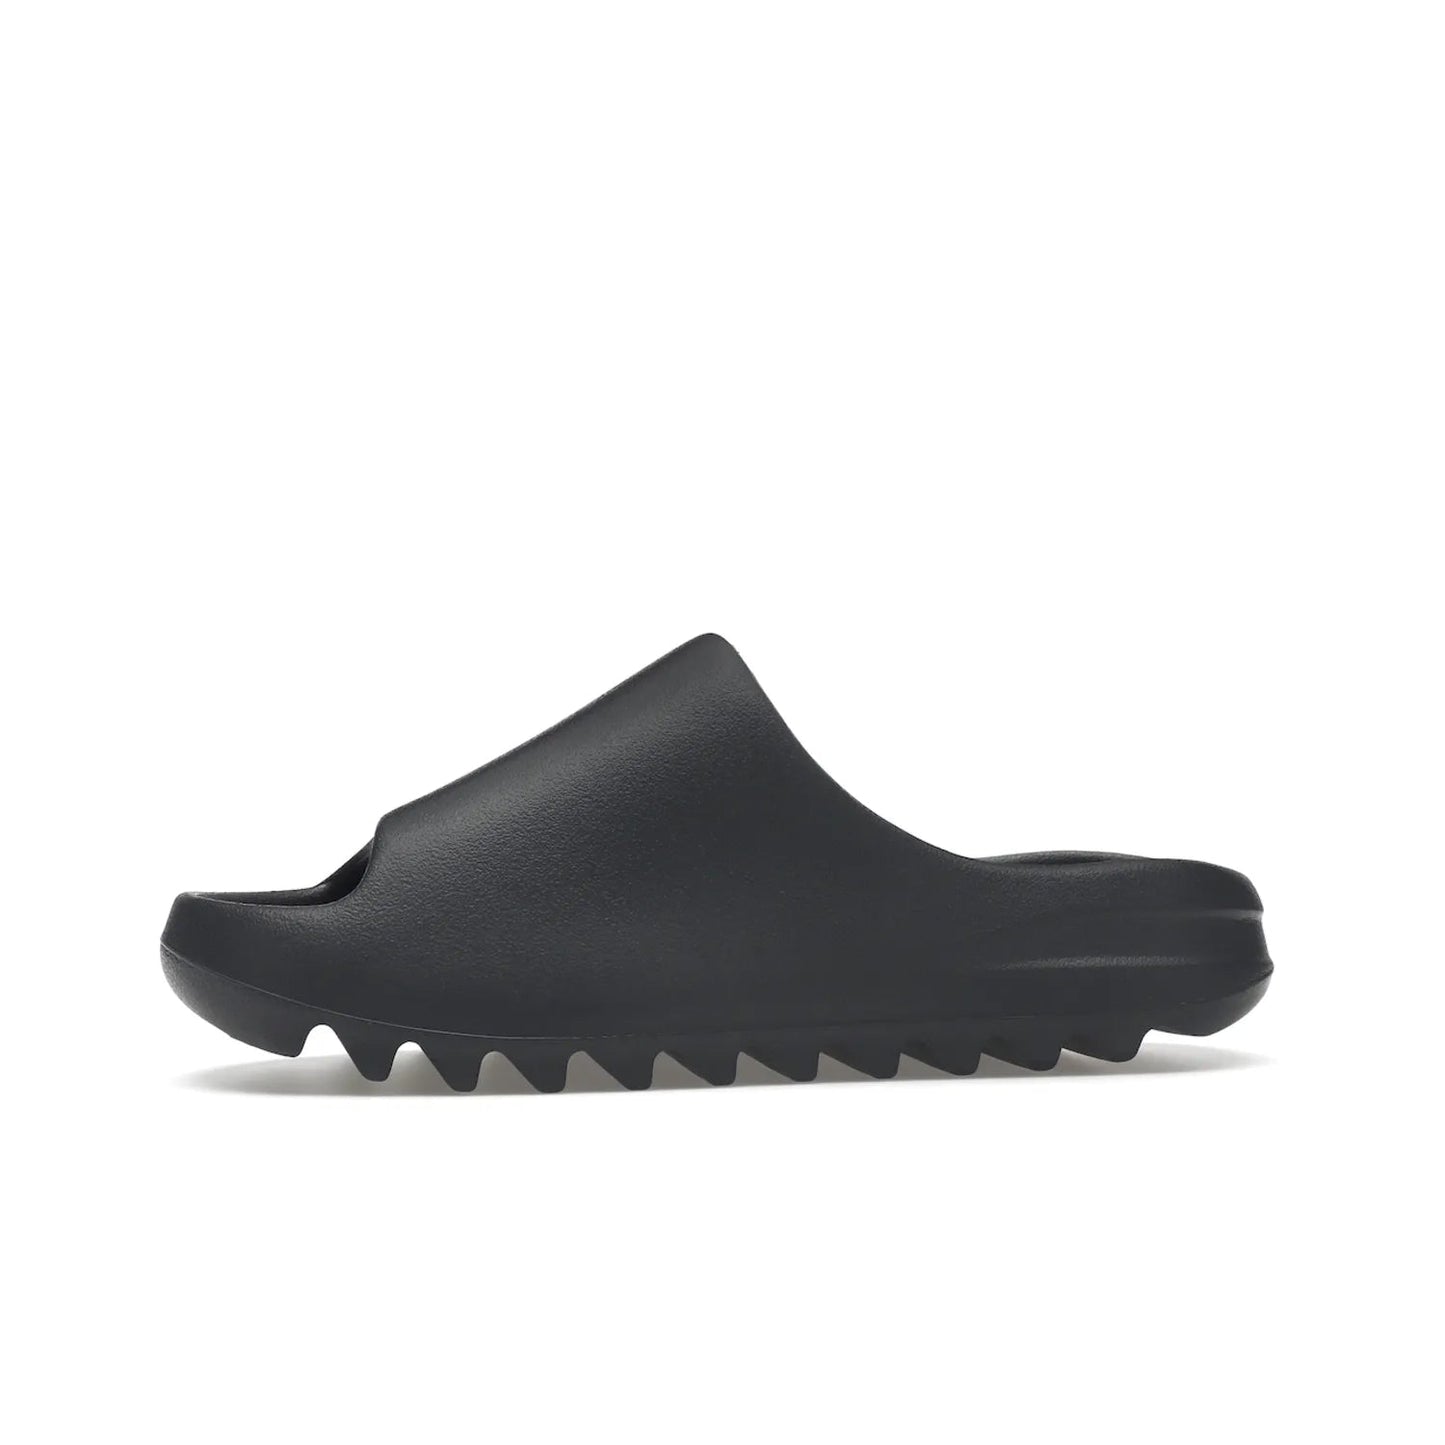 adidas Yeezy Slide Slate Grey - Image 18 - Only at www.BallersClubKickz.com - Stylish & comfortable adidas Yeezy Slide Slate Grey features an EVA foam upper, strategic cutouts, textured outsole pattern, & easy slip-on design for modern comfort & classic style.